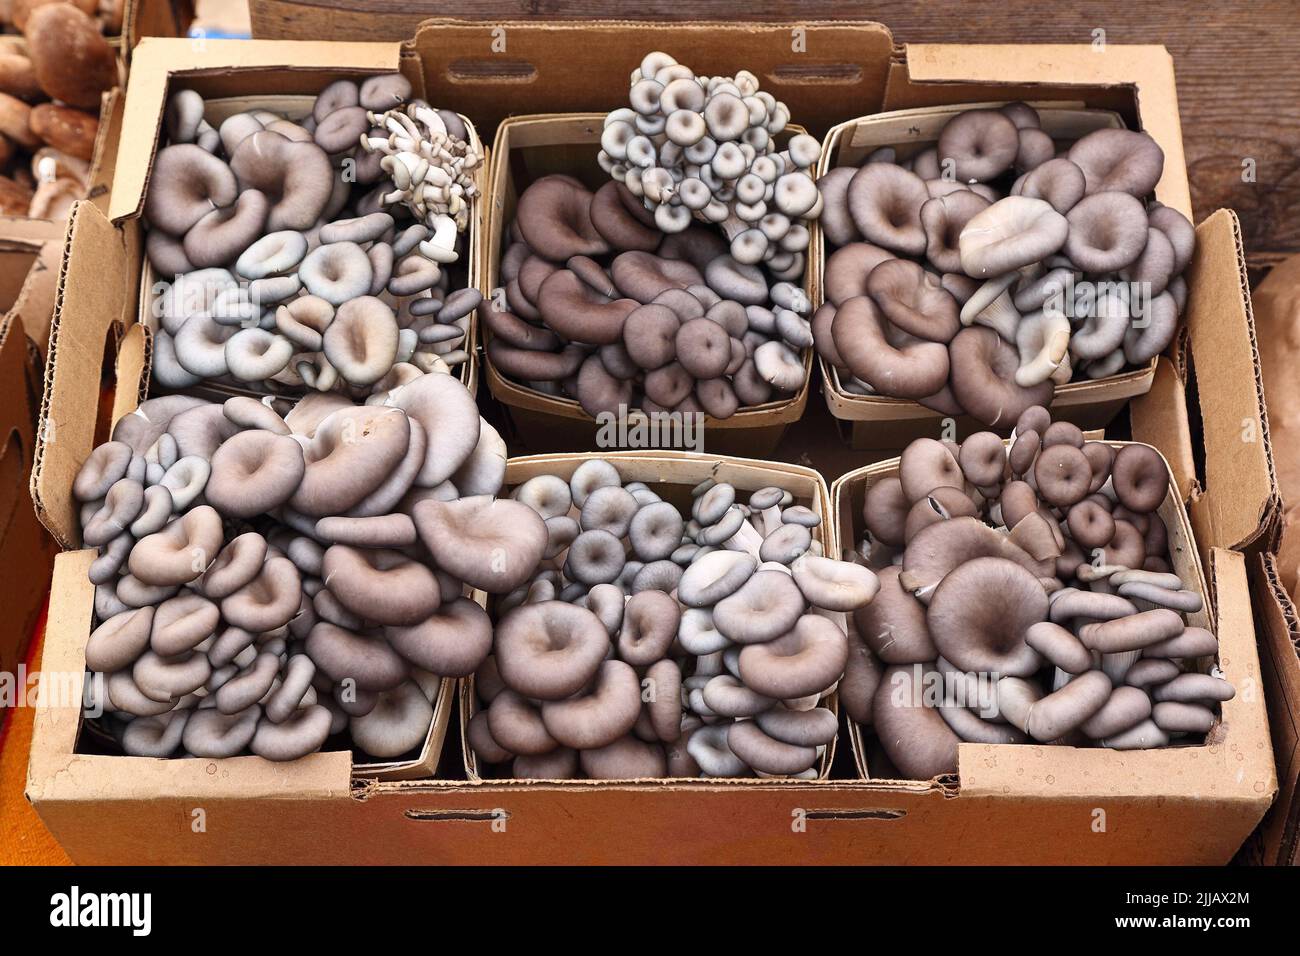 oyster mushrooms in cardboard box on sale at farmer's market Stock Photo